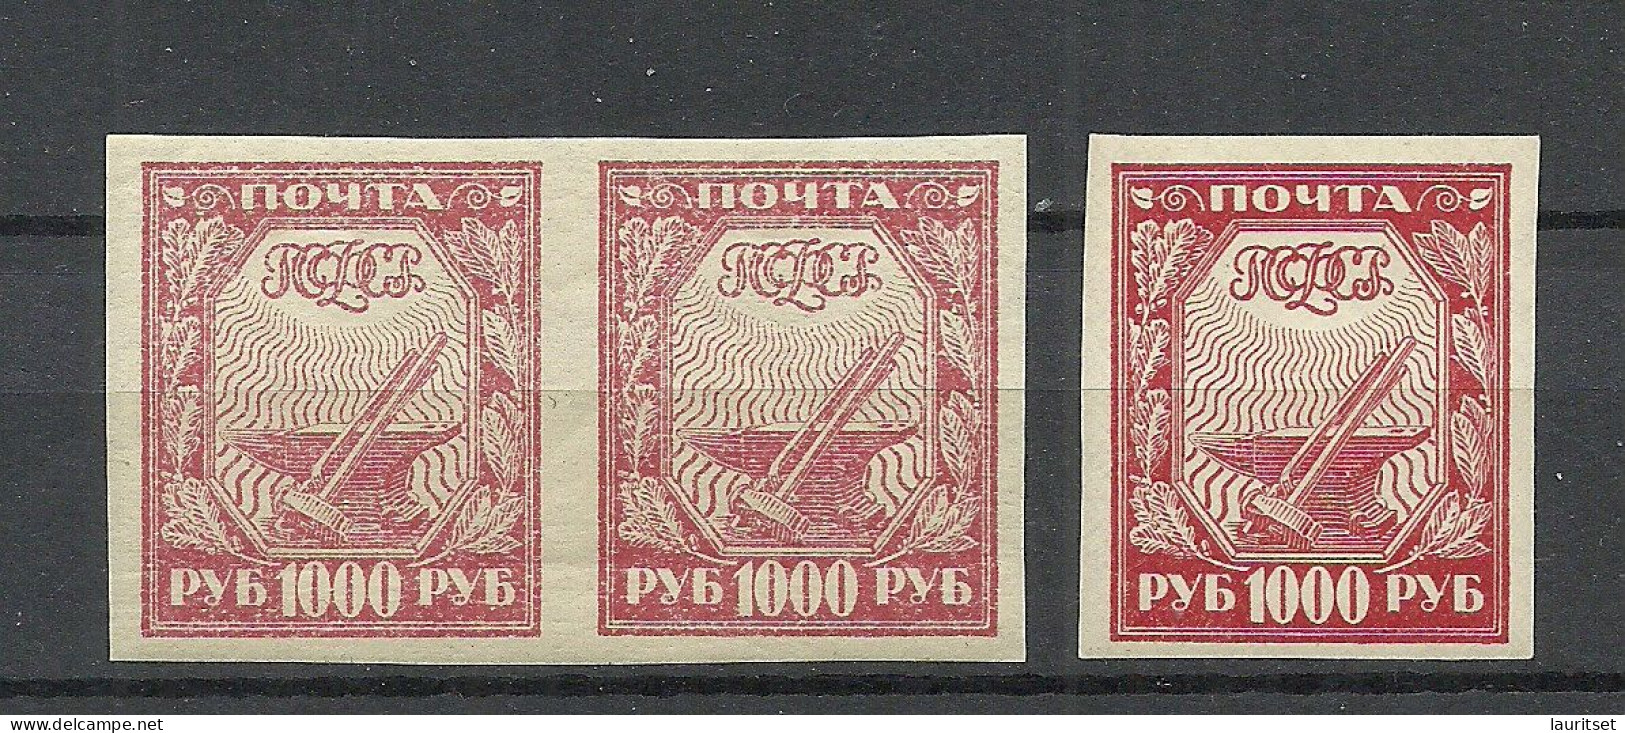 RUSSLAND RUSSIA 1921 Michel 161 MNH Very Light Shade Variety As 3-stripe + Normal/regular Shade - Unused Stamps